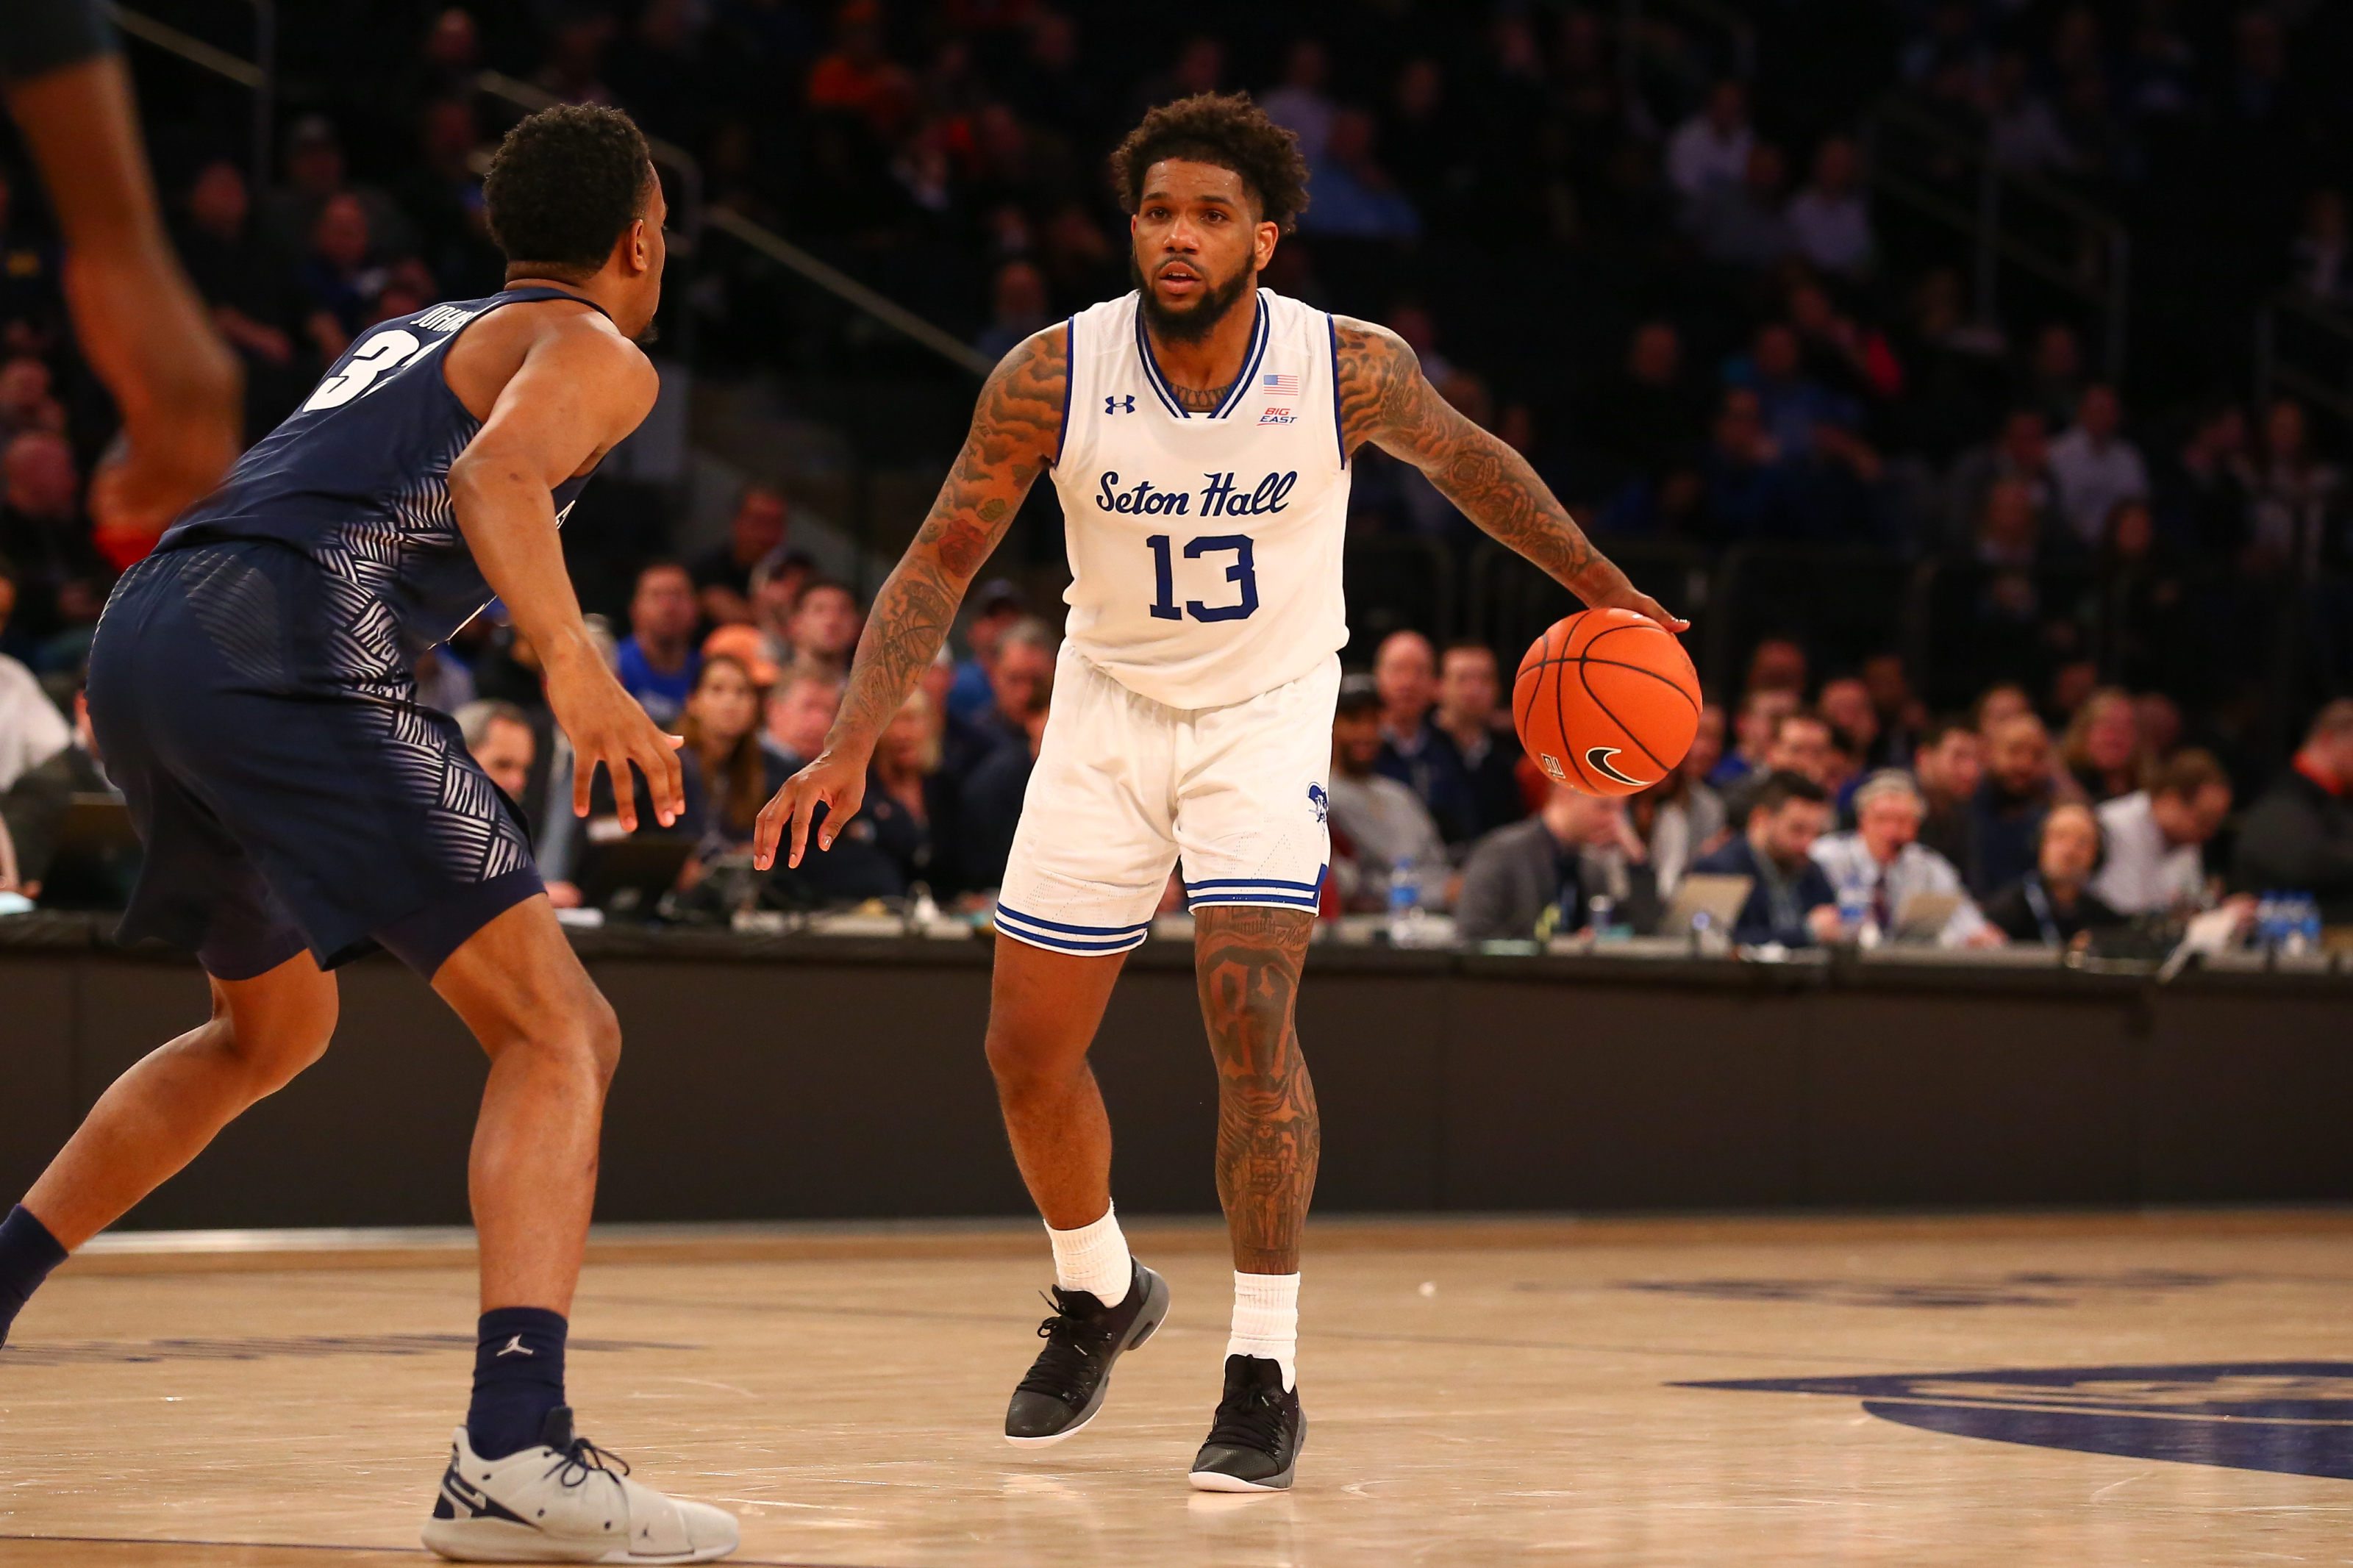 Myles Powell: Seton Hall could've made March Madness run